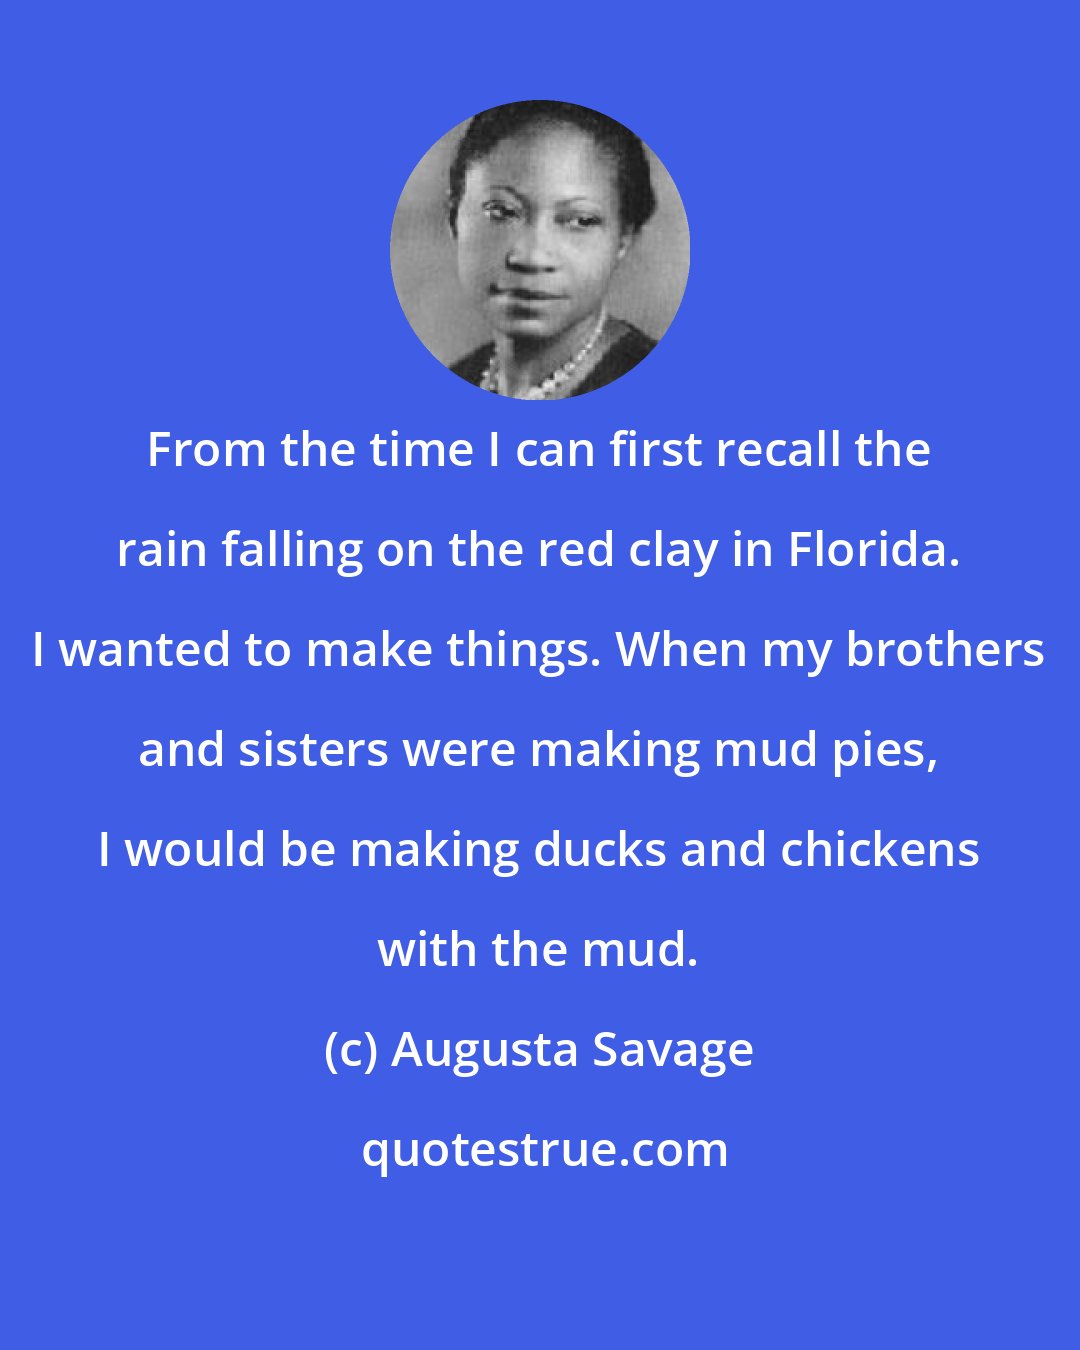 Augusta Savage: From the time I can first recall the rain falling on the red clay in Florida. I wanted to make things. When my brothers and sisters were making mud pies, I would be making ducks and chickens with the mud.